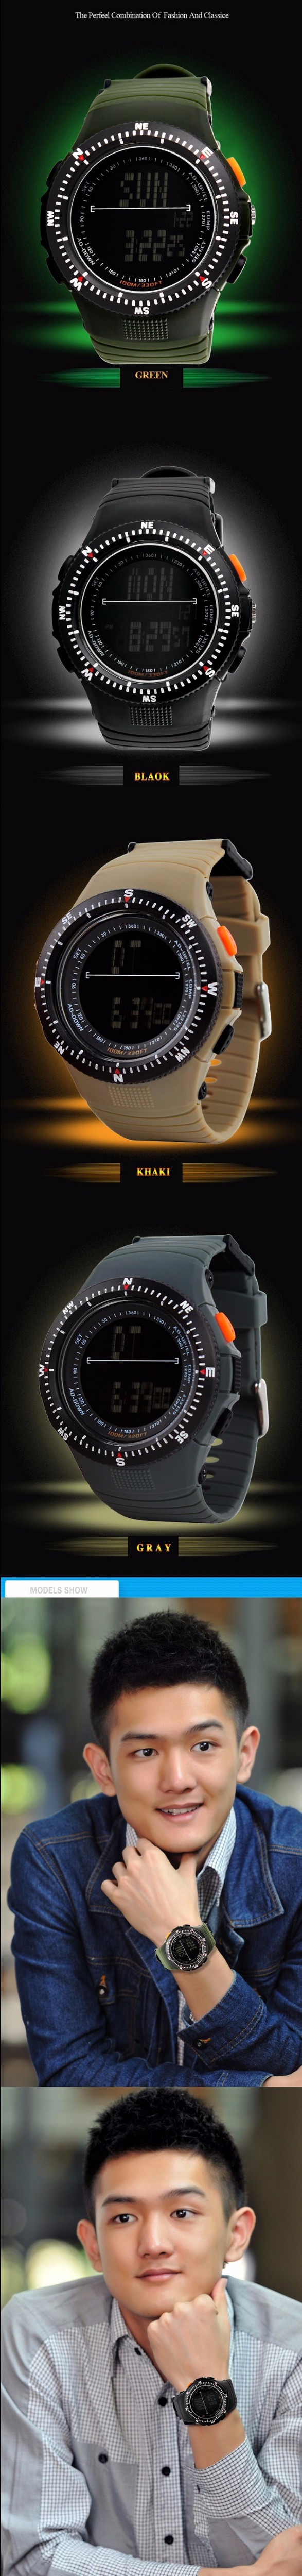 2014 Hot Sales Outdoor Digital Men Sports Watches Skmei Military Watches Army Watch Waterproof 50m Auto Date Alarm Stop Watch (1)